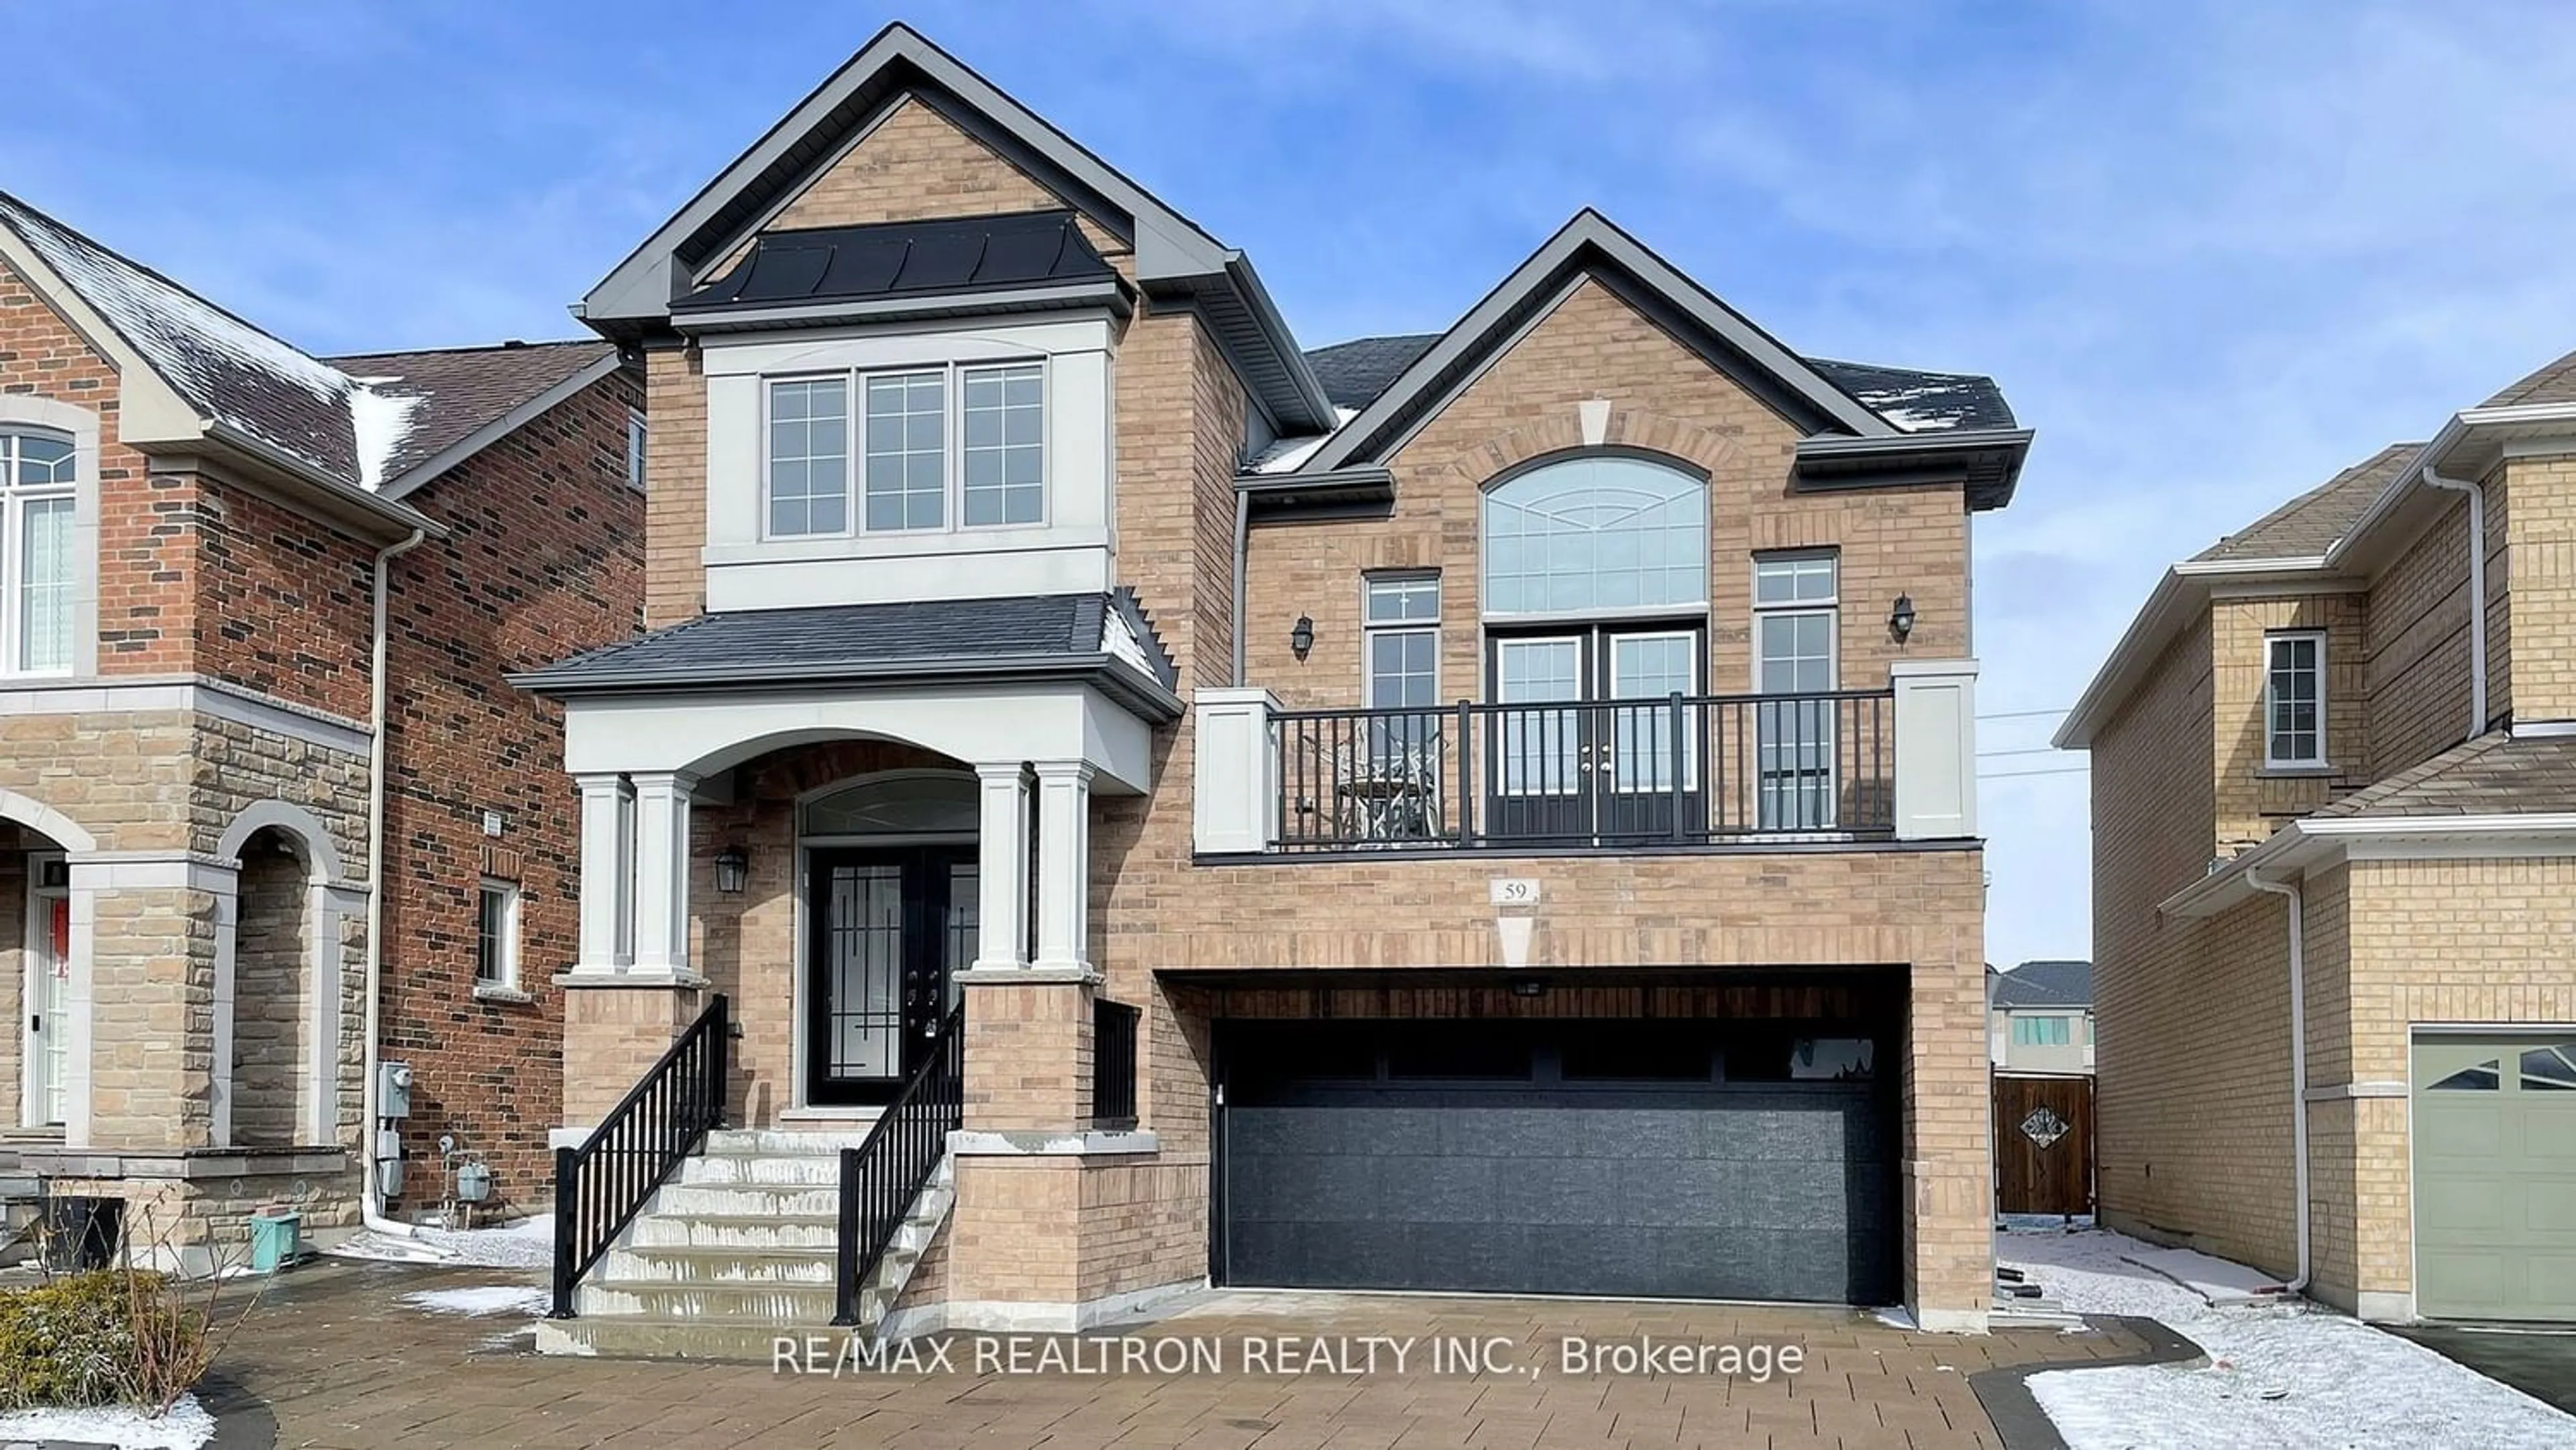 Home with brick exterior material for 59 James Joyce Dr, Markham Ontario L6C 0L7